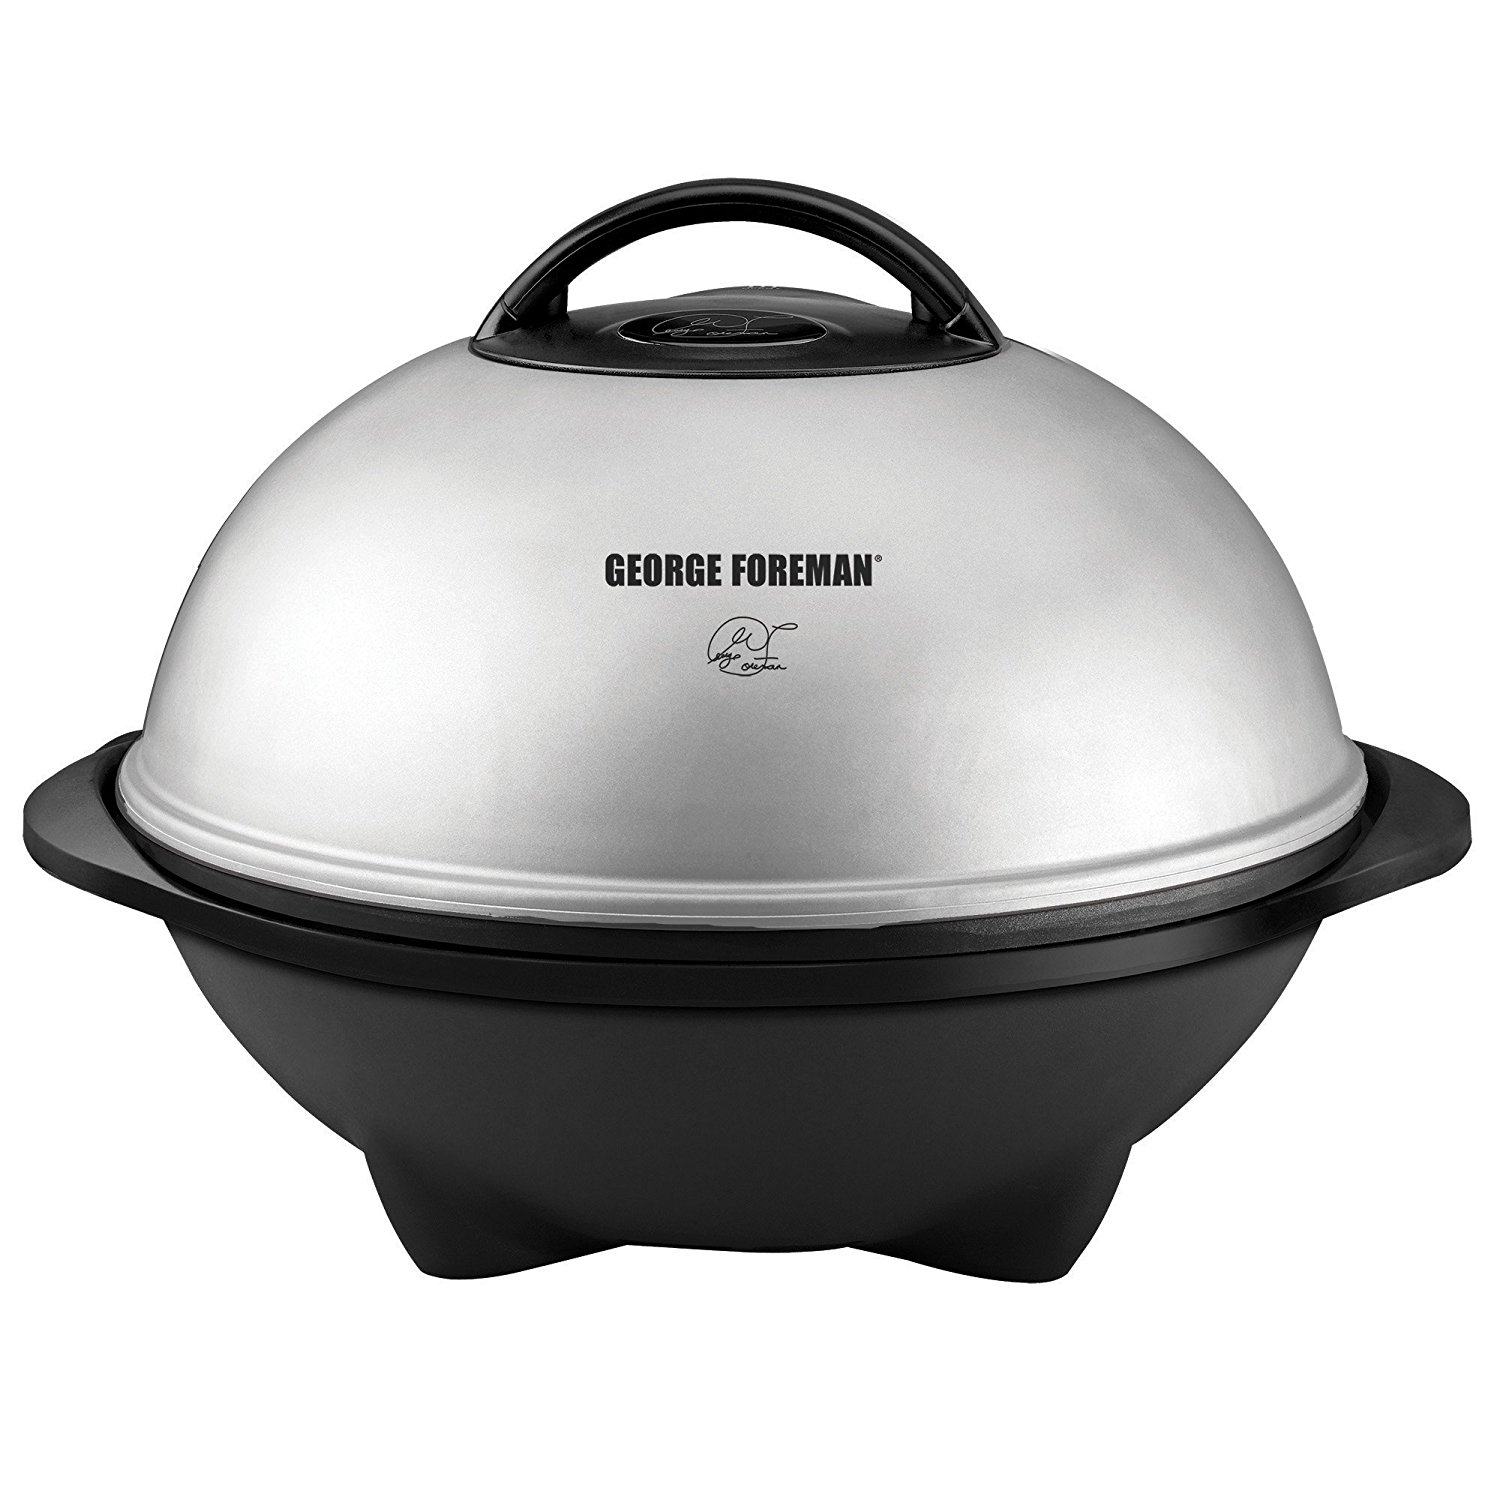 George Foreman Grill – An Indoor/Outdoor Grill -Best Seller